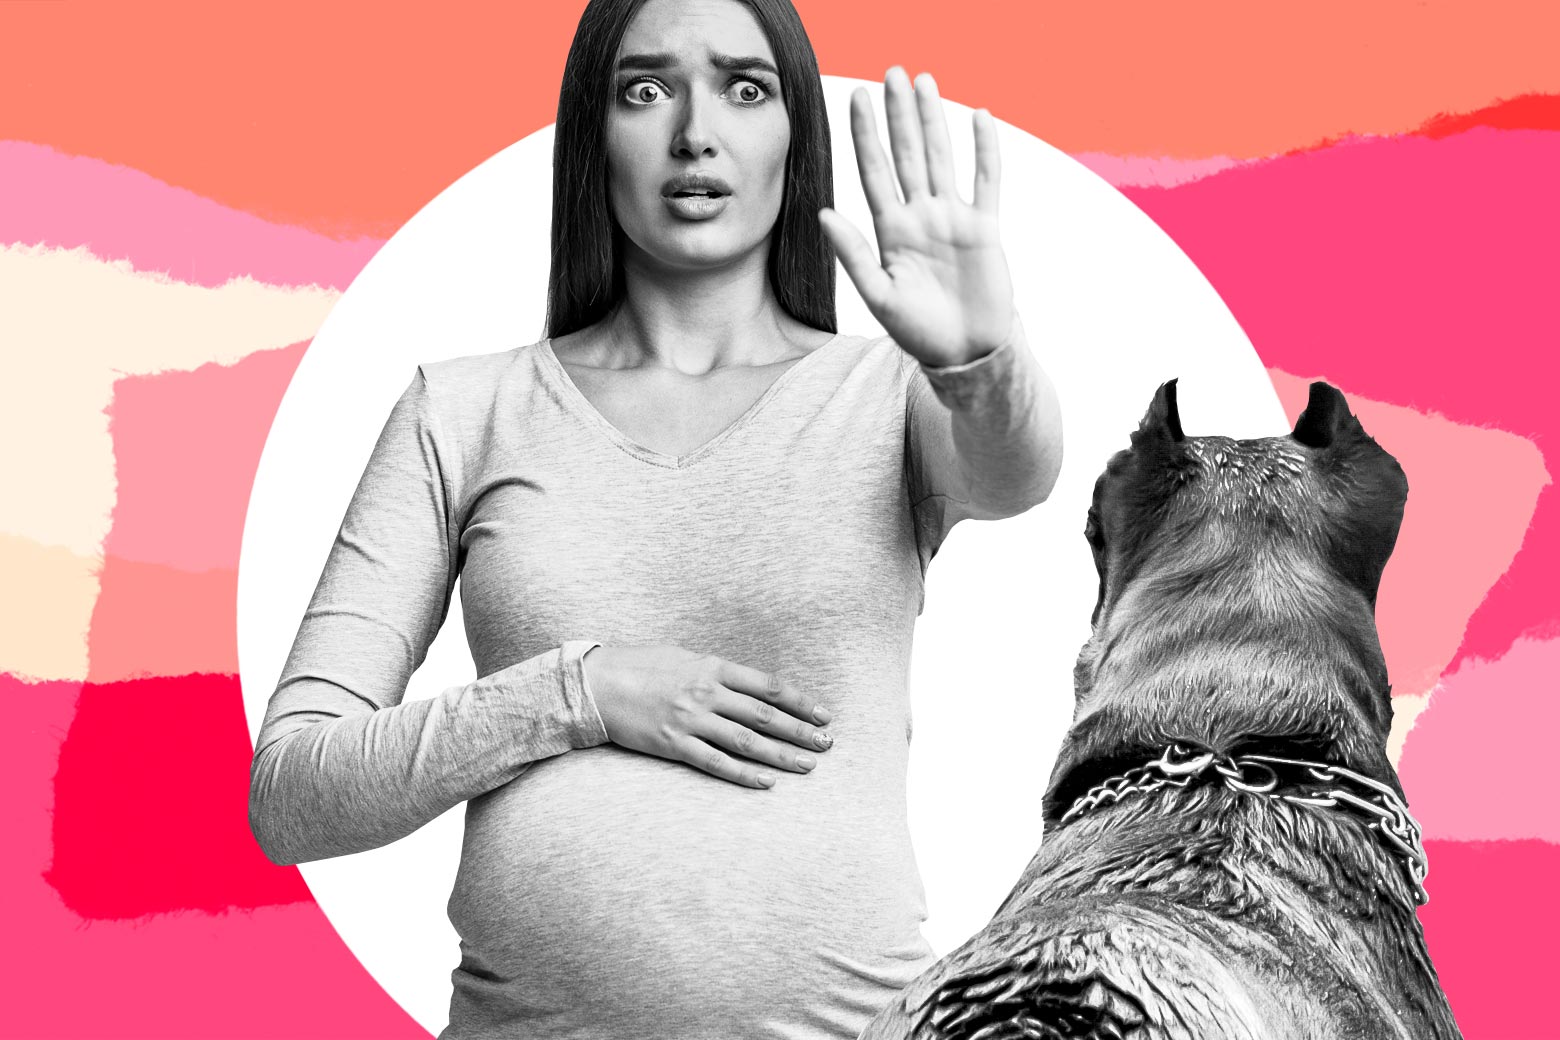 Photo illustration of a very pregnant woman who looks worried holding a hand out in a STOP motion to a large dog.